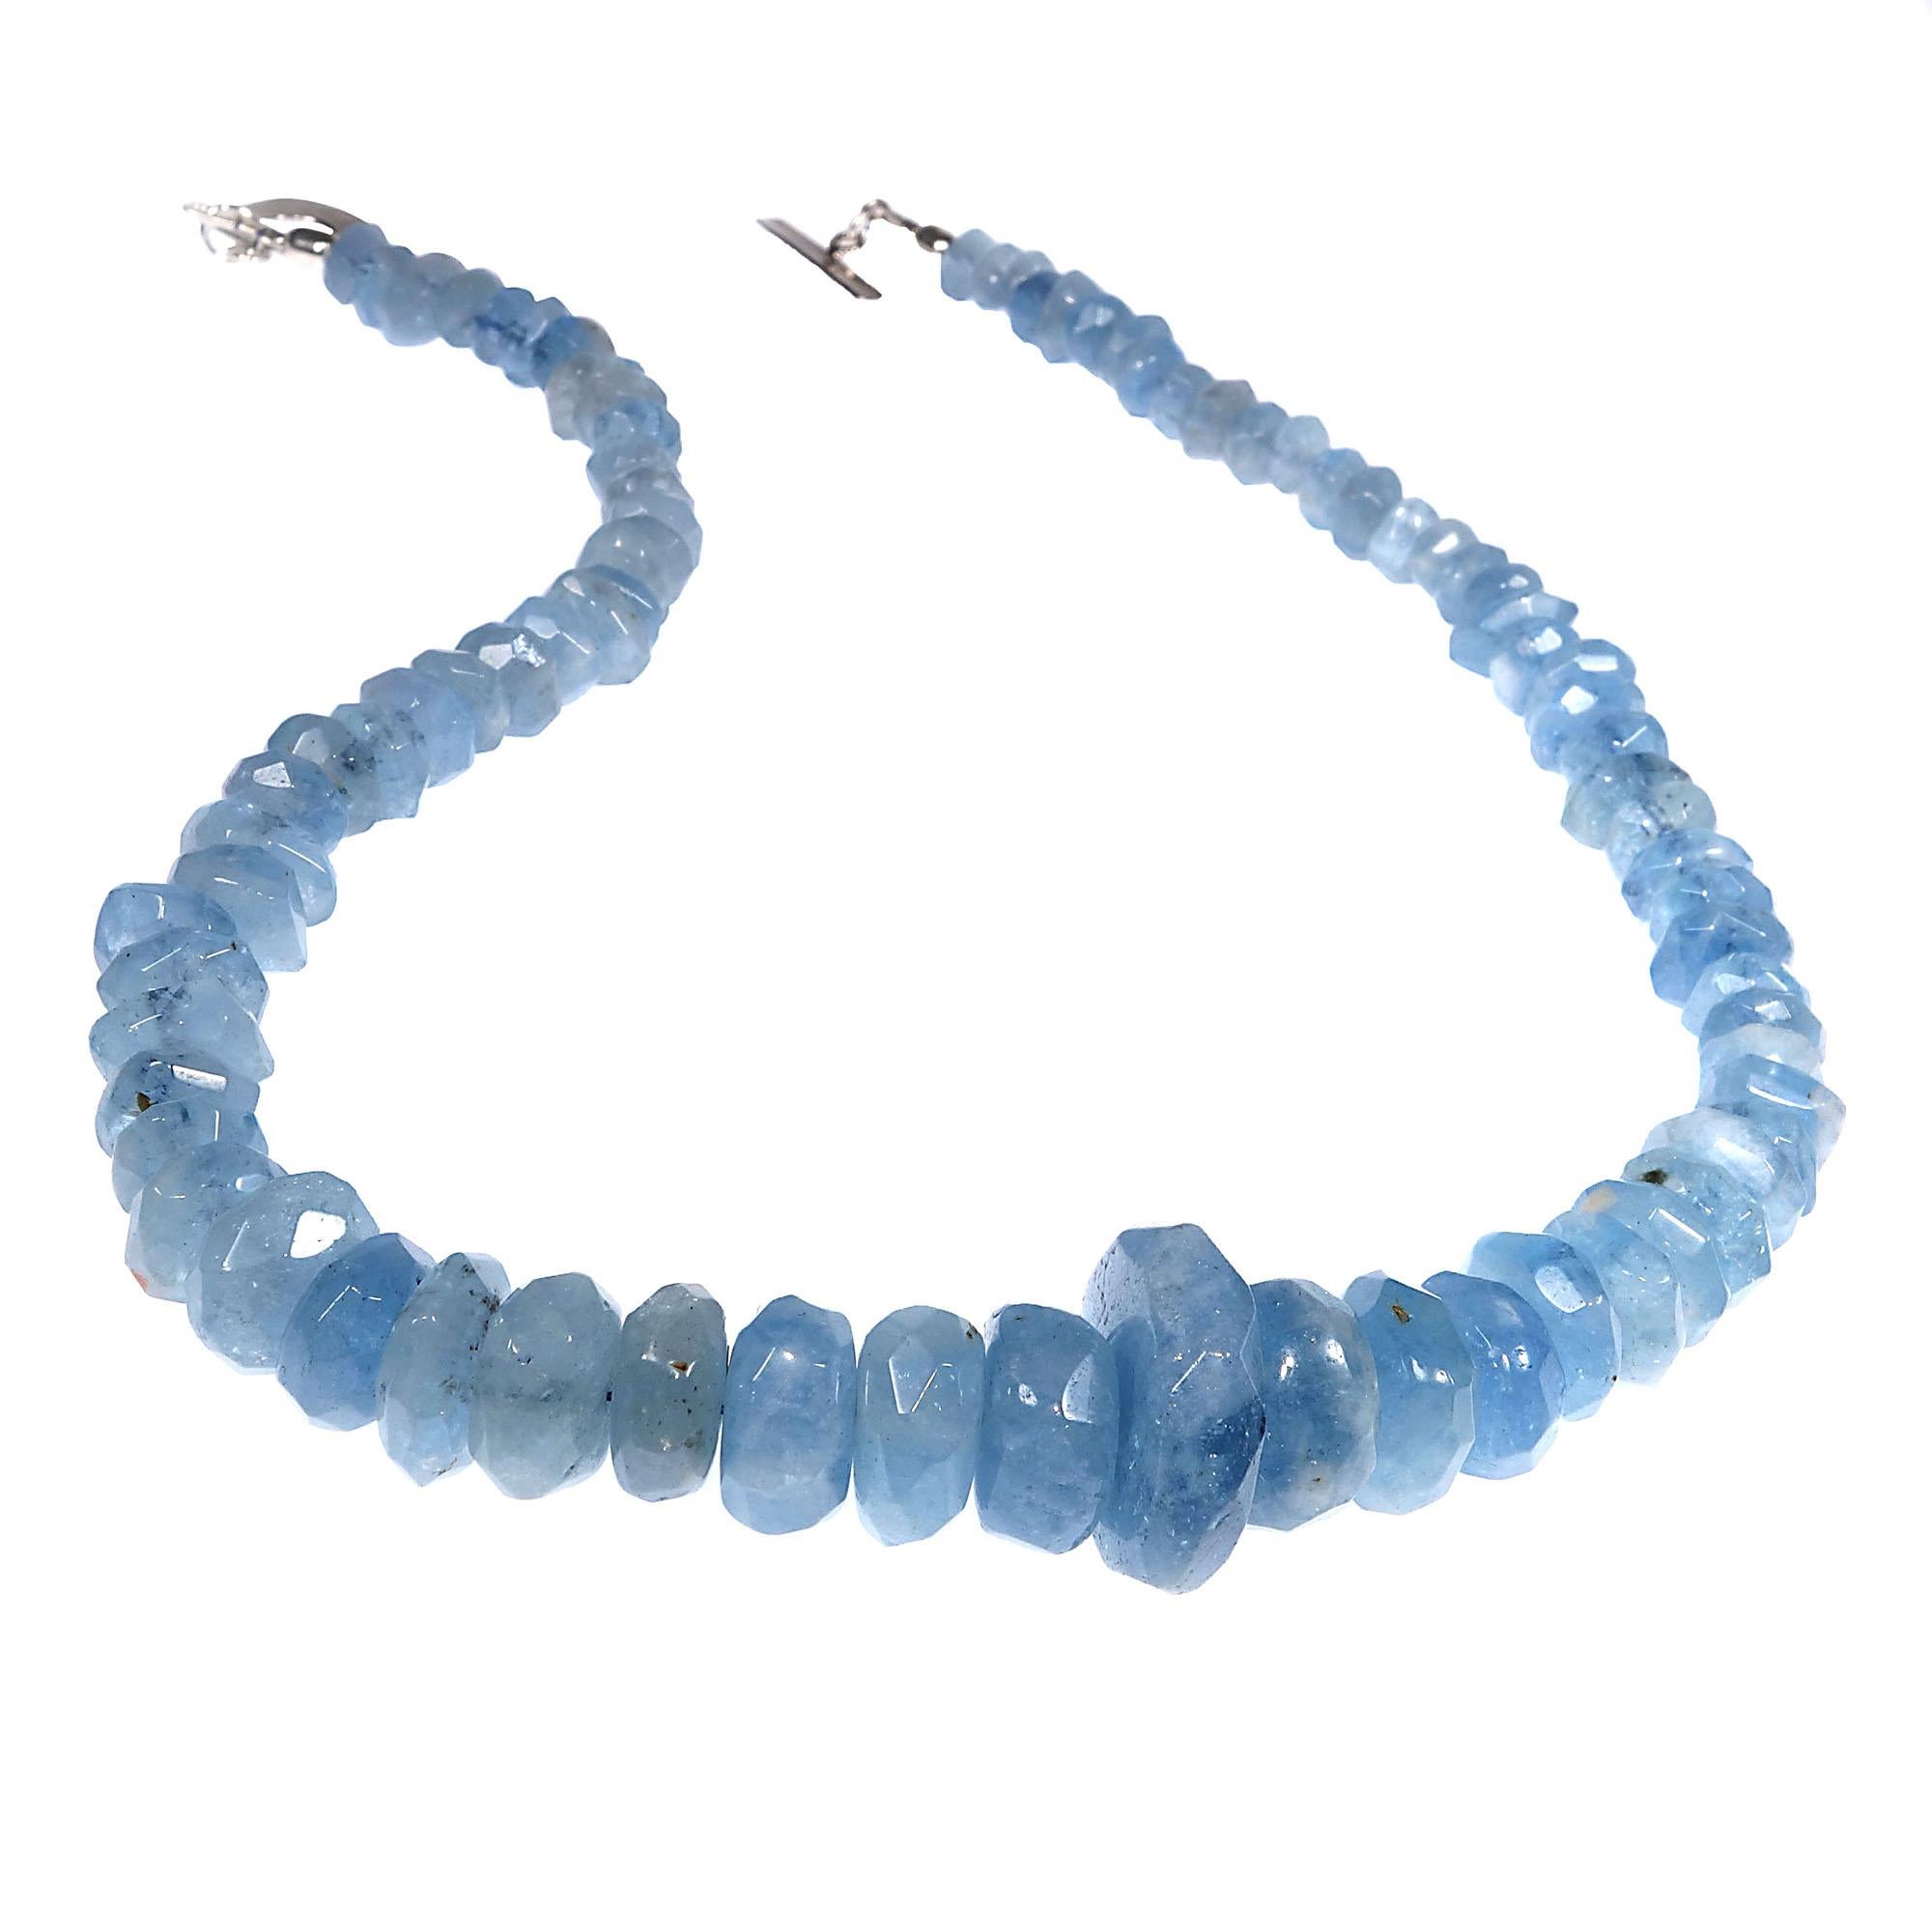 Unique 17 Inch necklace of translucent blue Aquamarine rough cut rondelles.  These gorgeous graduated Aquamarines will make your head spin. This handmade necklace is secured with a Sterling Silver toggle.  